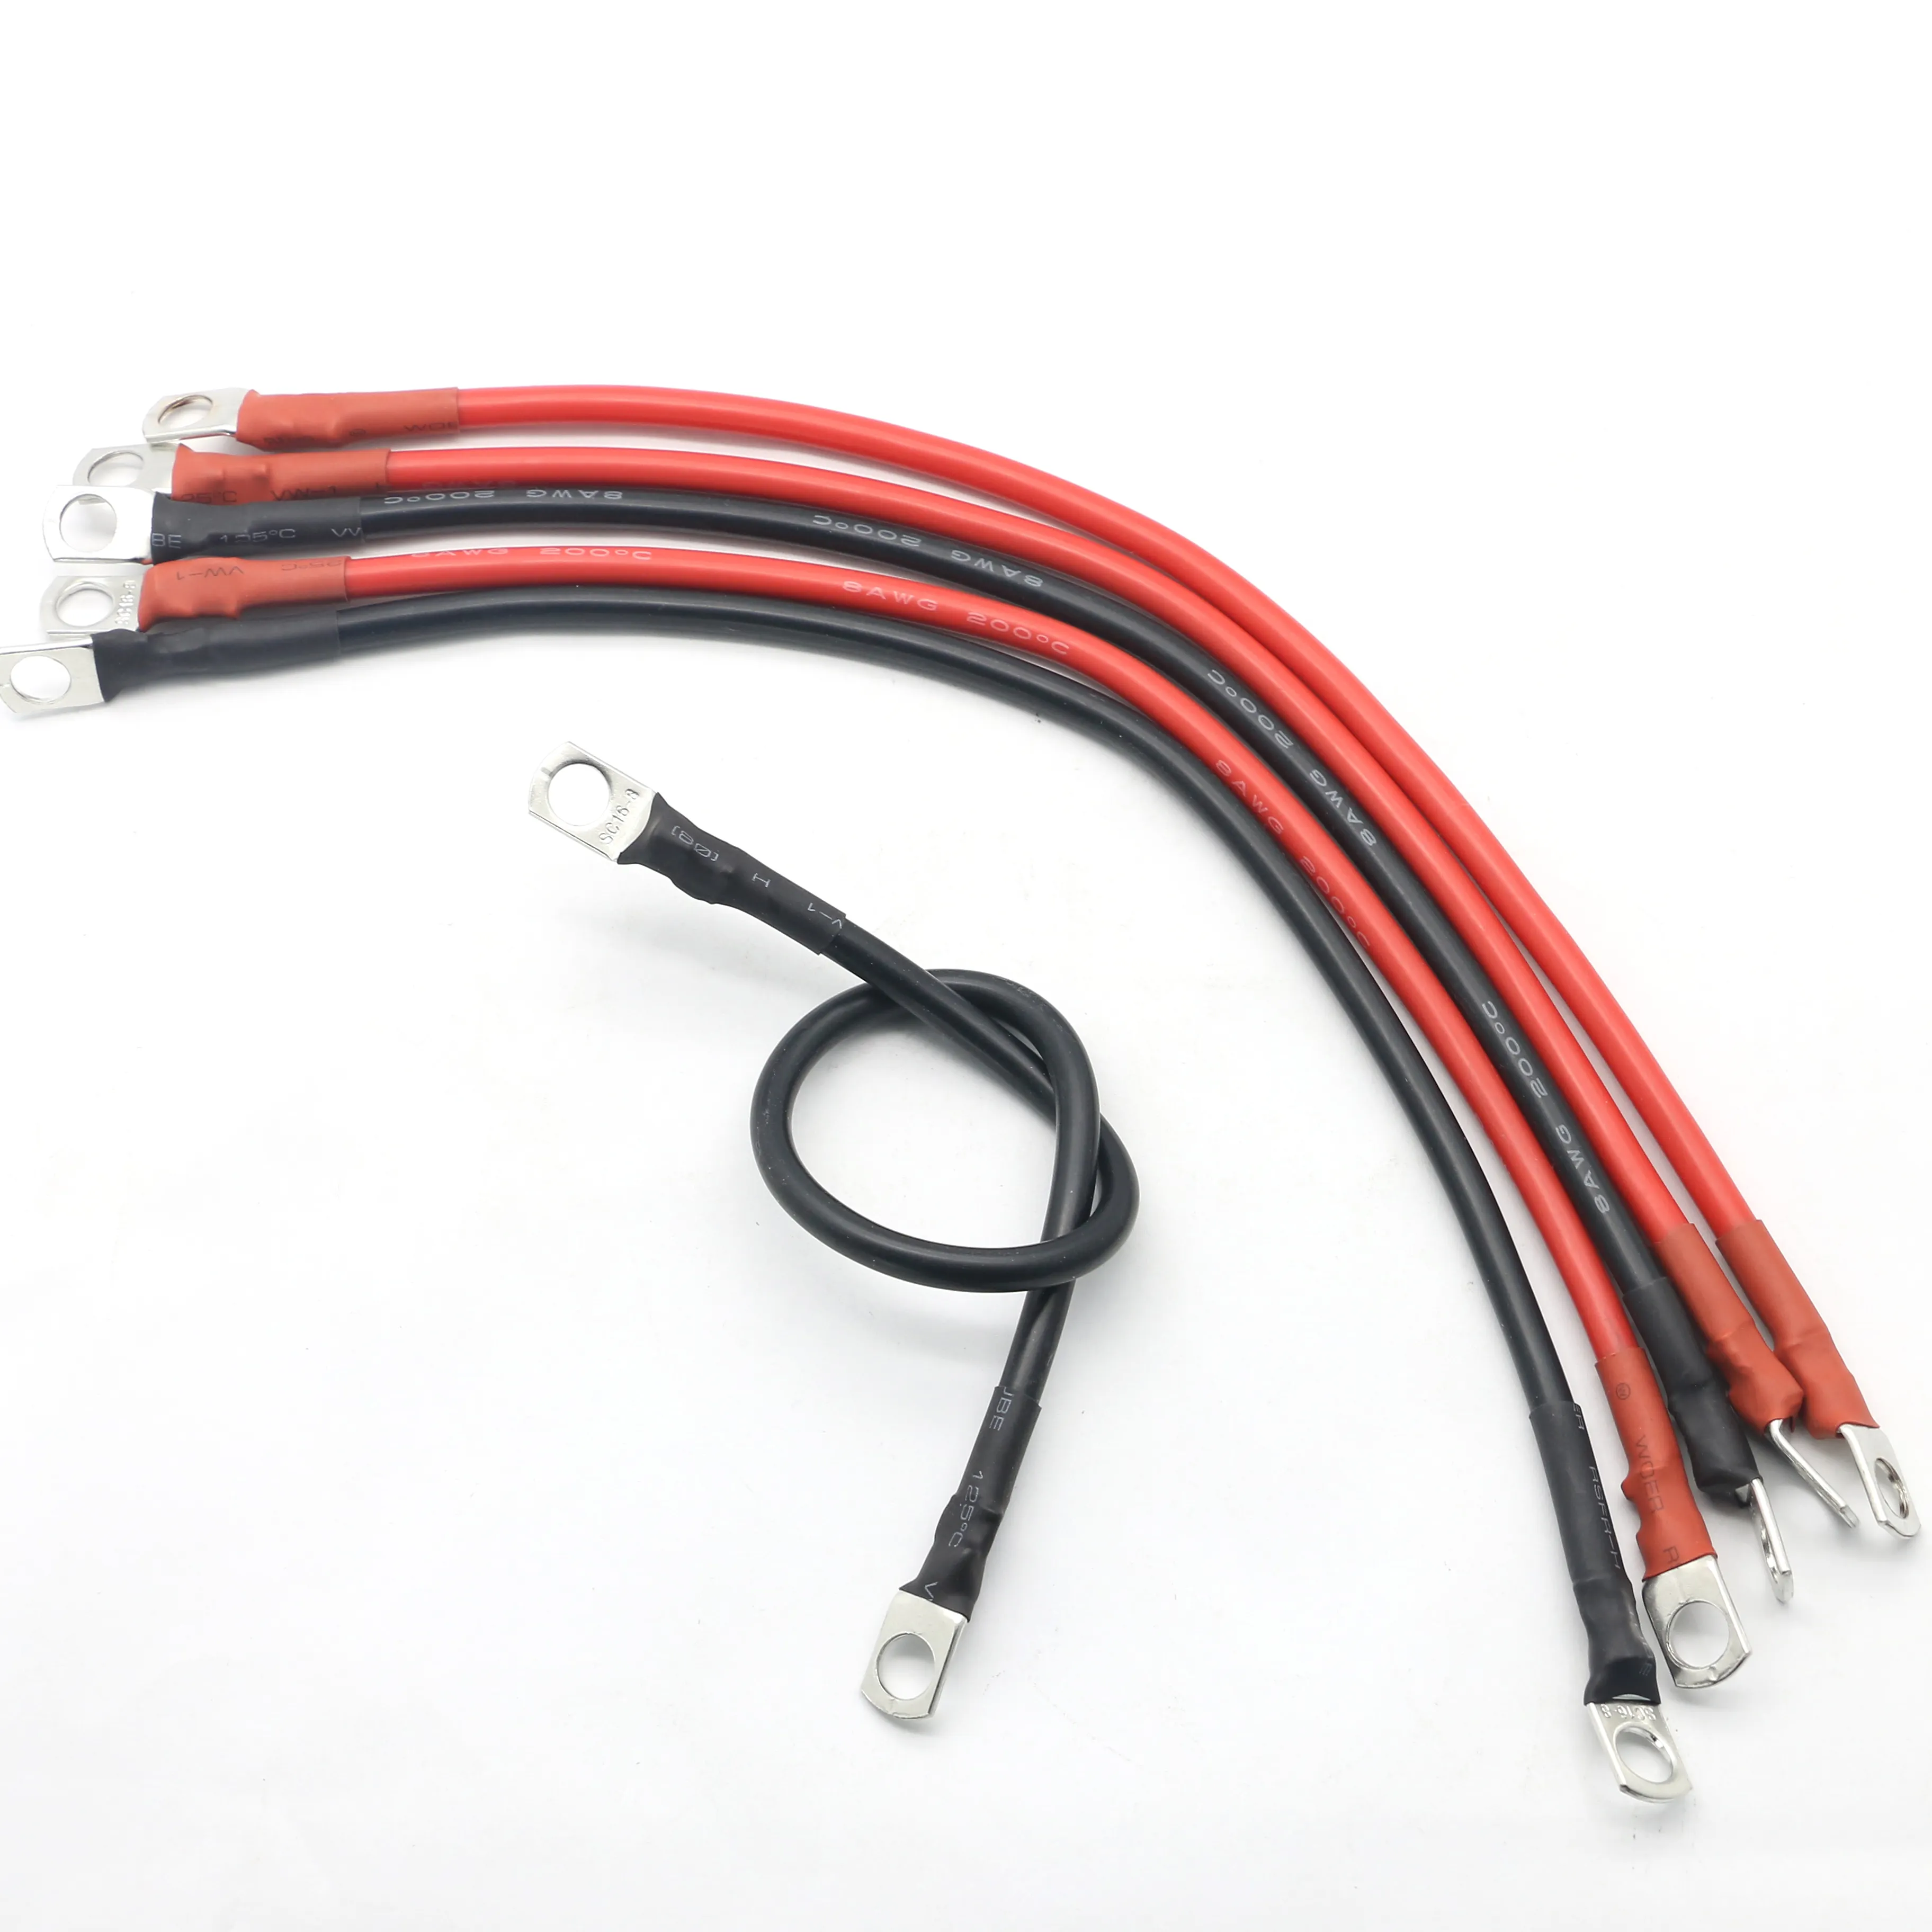 2AWG 4AWG 6AWG 8AWG 10AWG 12AWG 14AWG 16AWG 18AWG Red and black silicone wire heat-resistant flexible silicone rubber cable